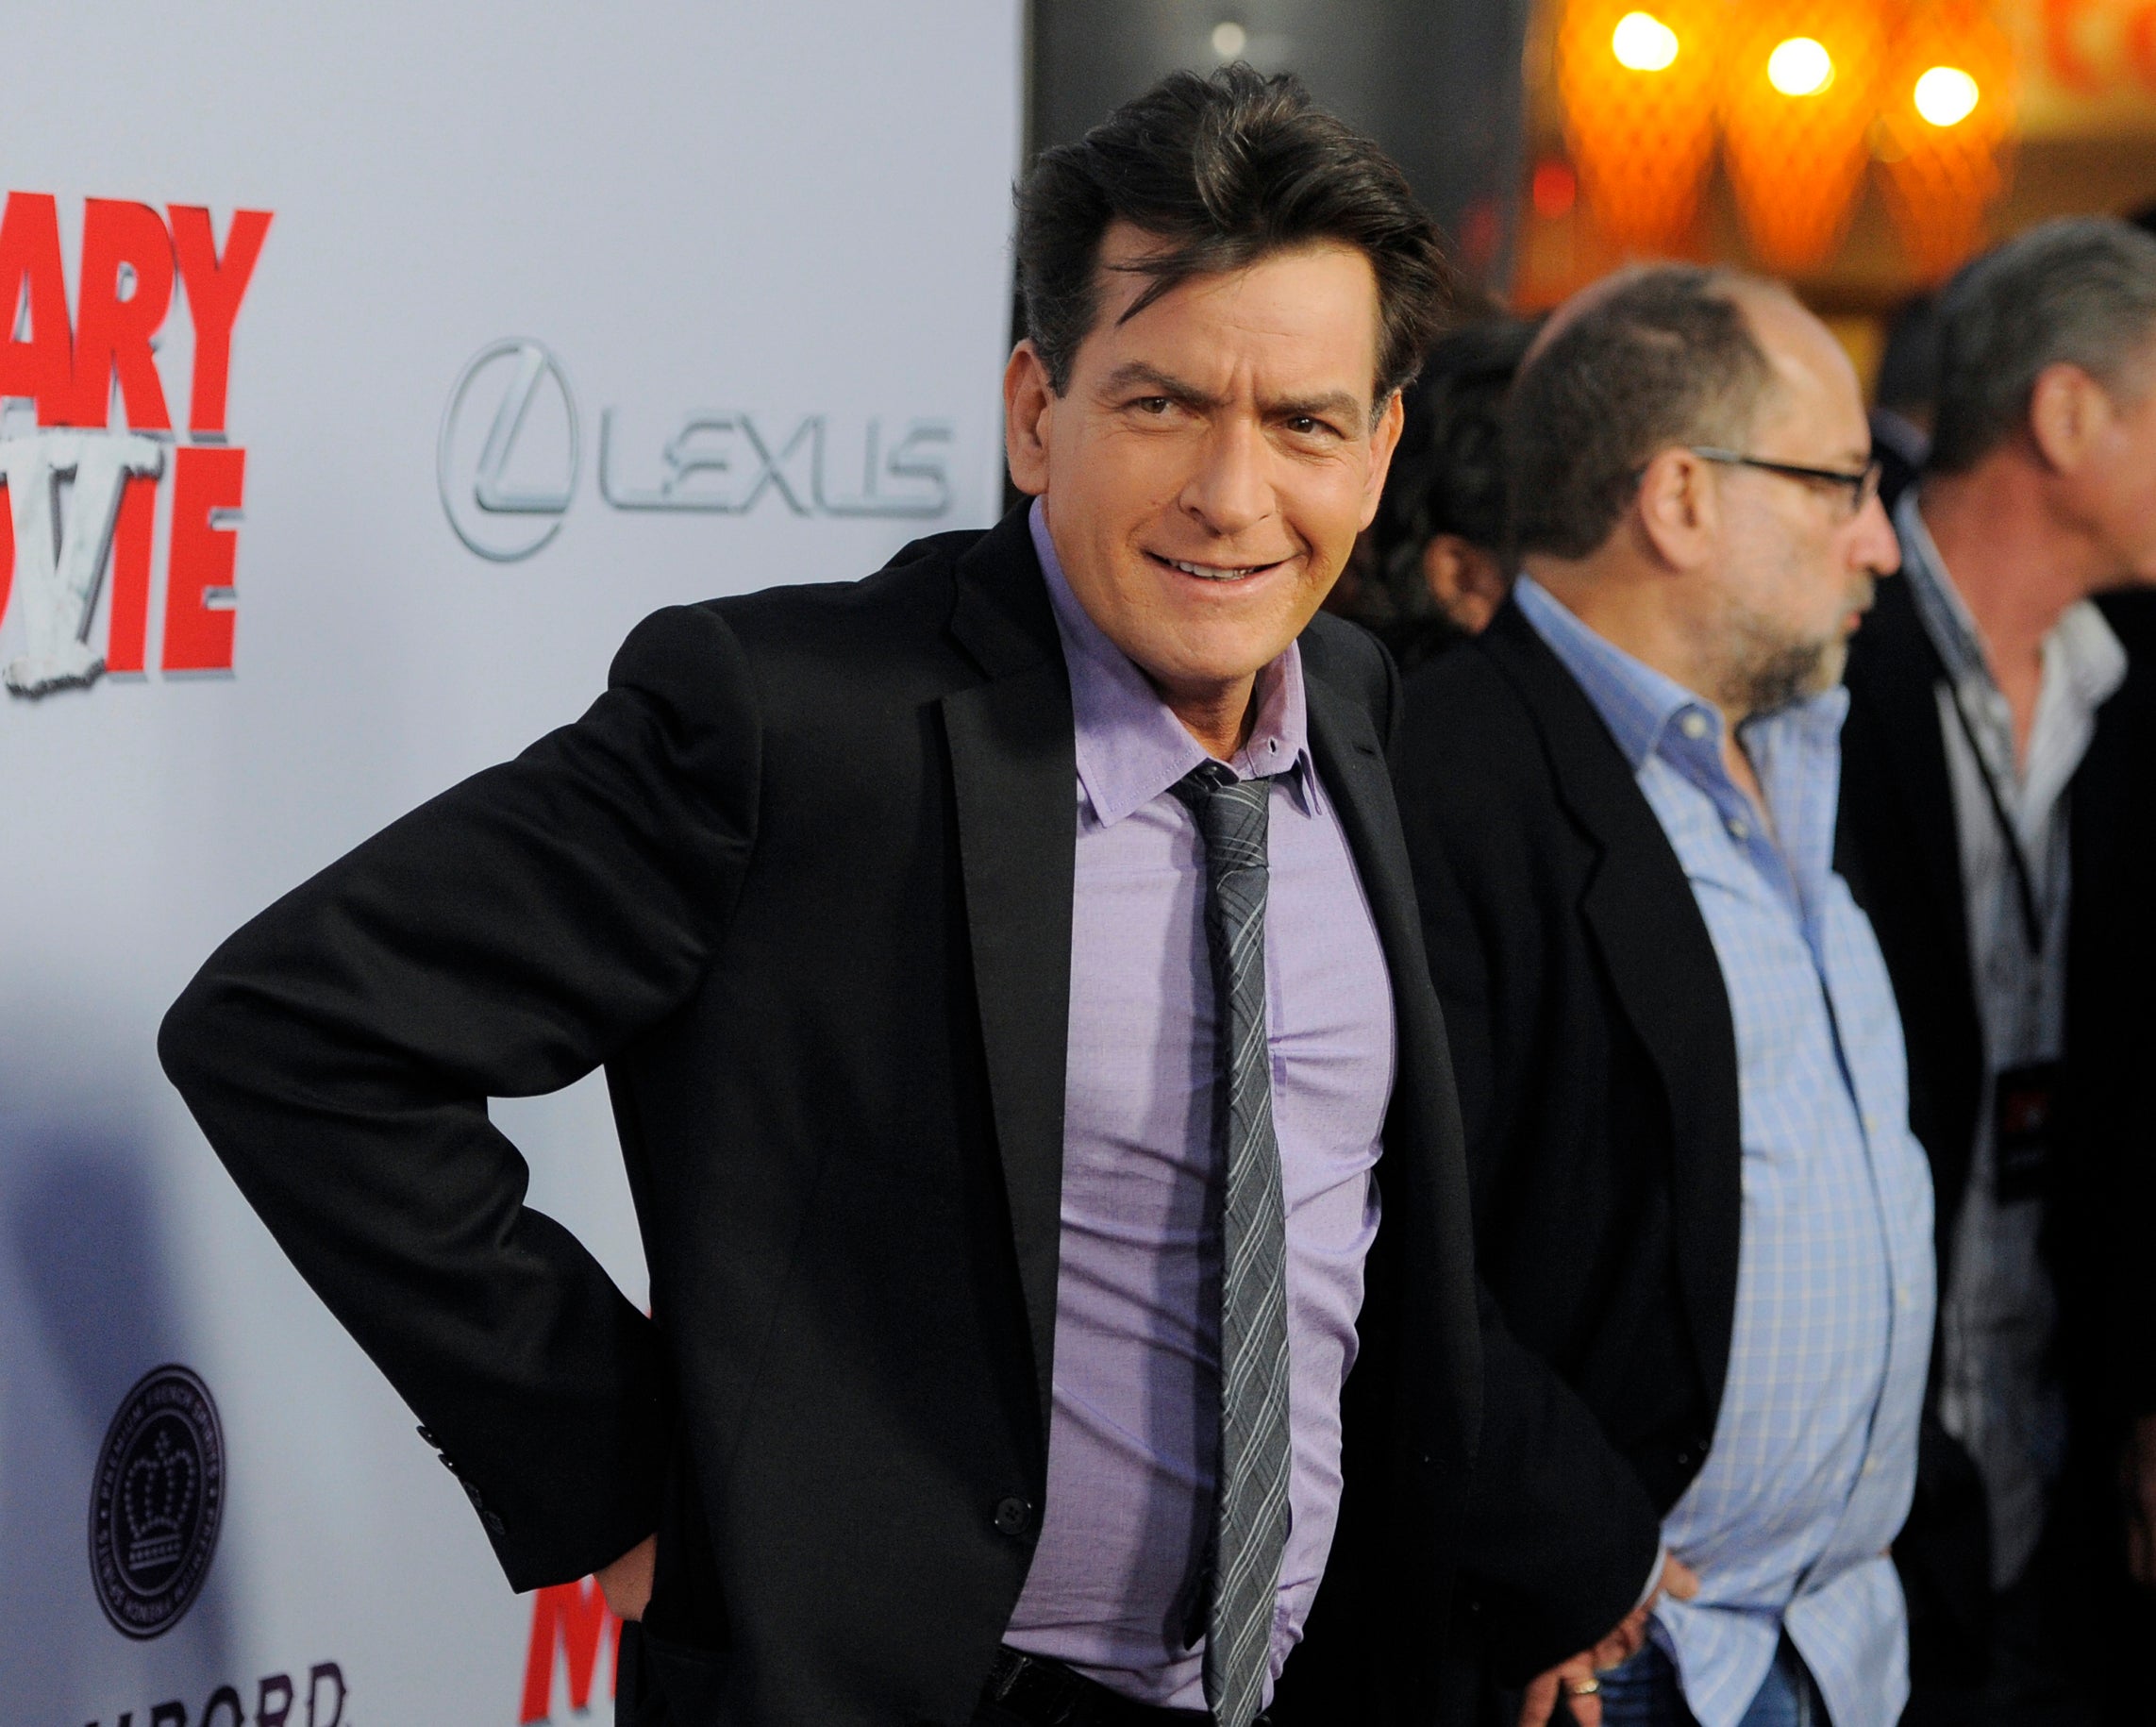 Sheen was said to be “fearful” following the incident